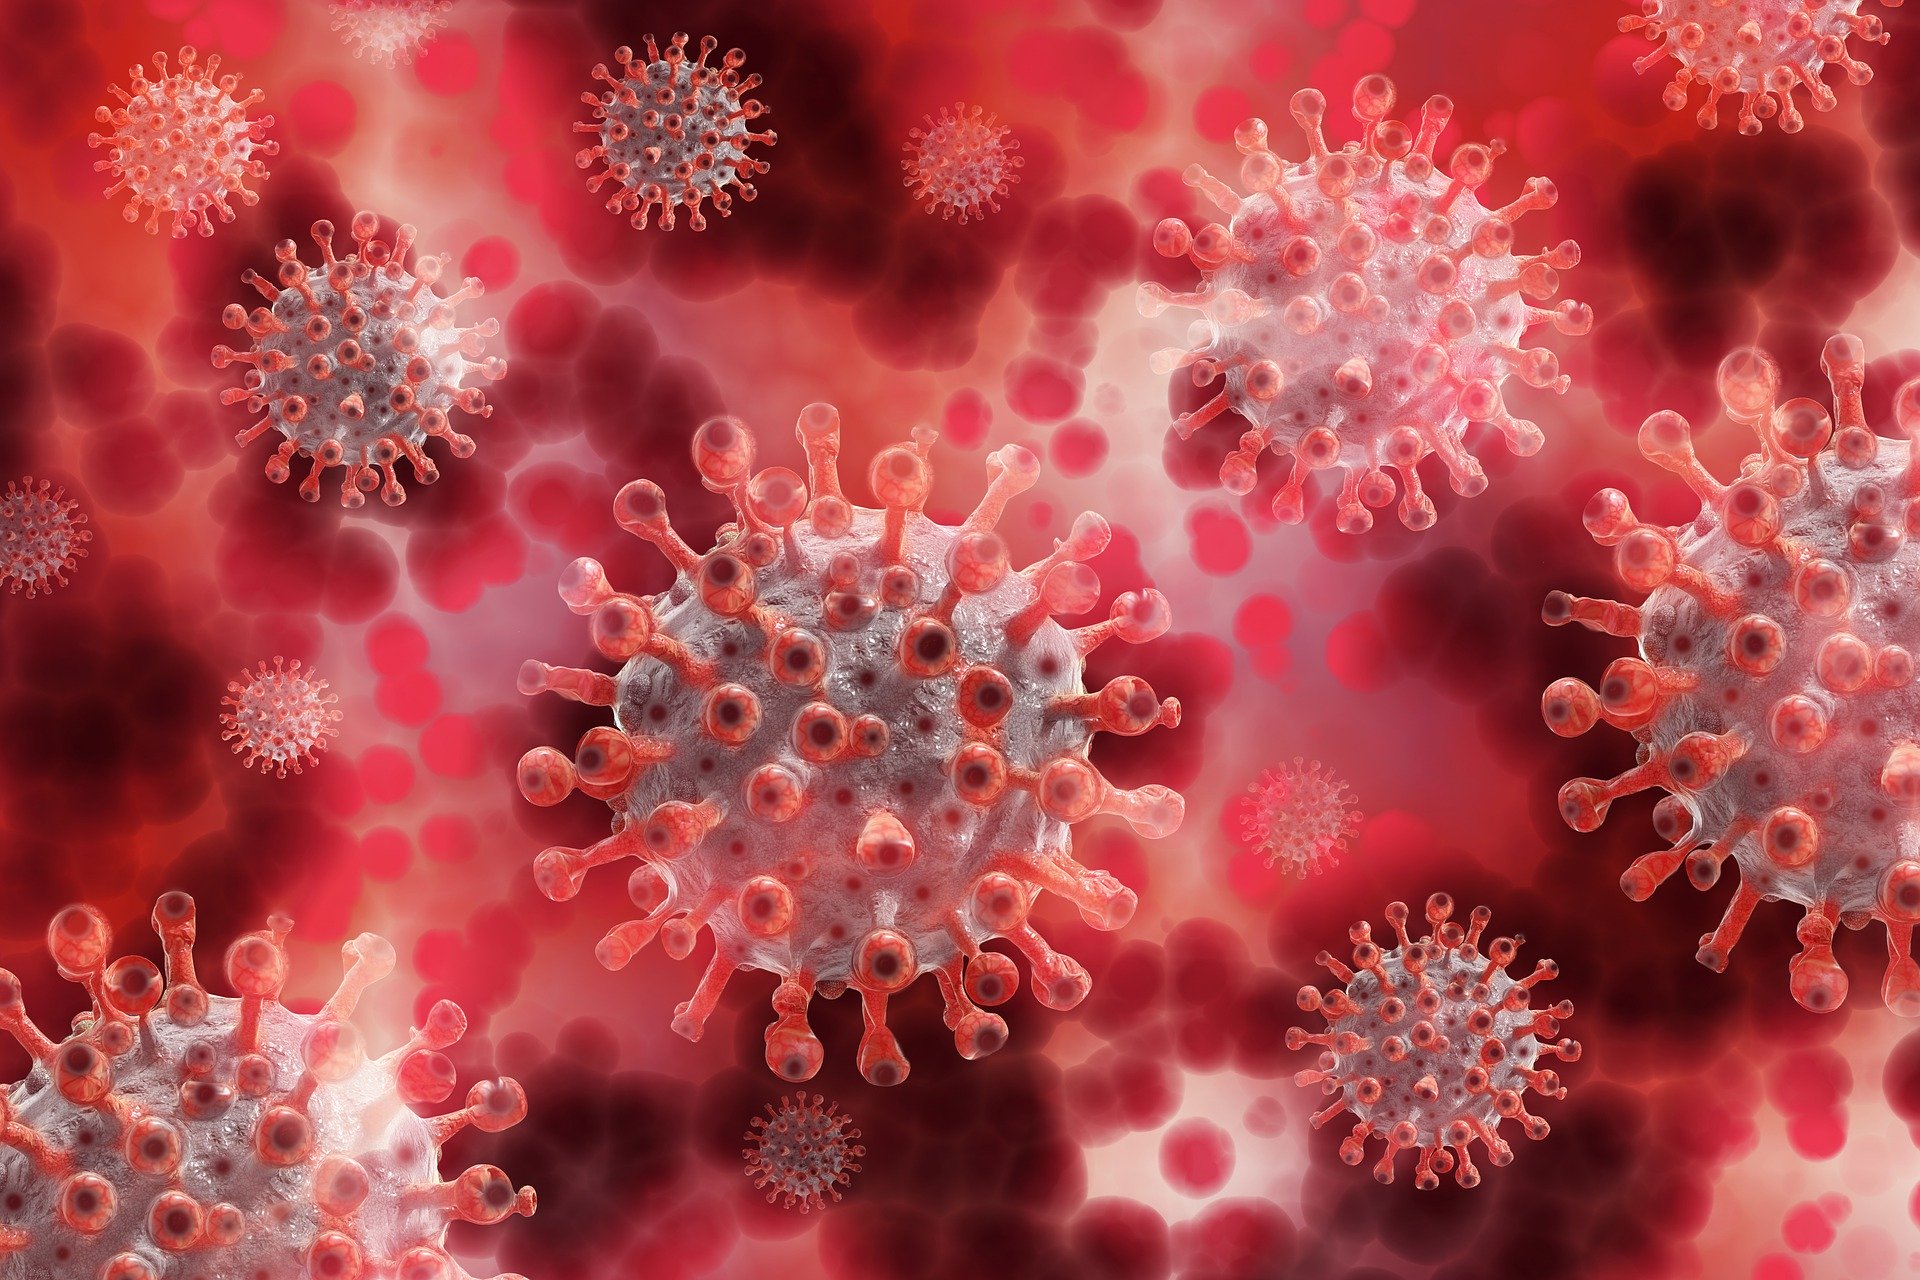 Hungarian Research Group: Coronavirus Extremely Flexible and Resilient, Able to Self-heal